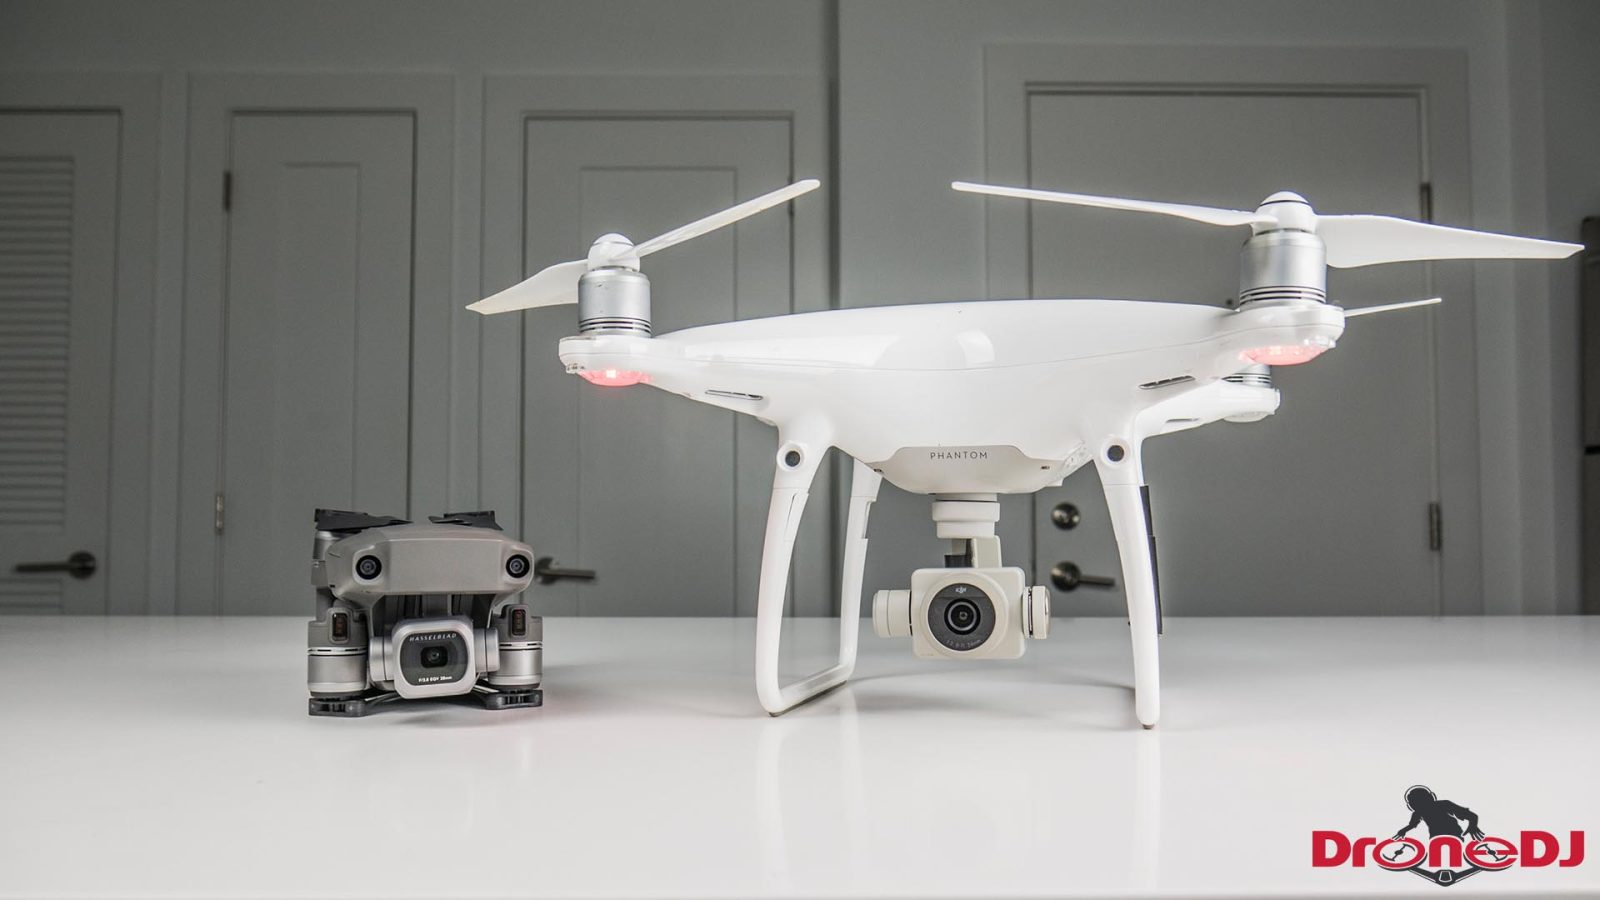 What will become of DJI's Phantom series after the release of the Mavic 2 Pro?